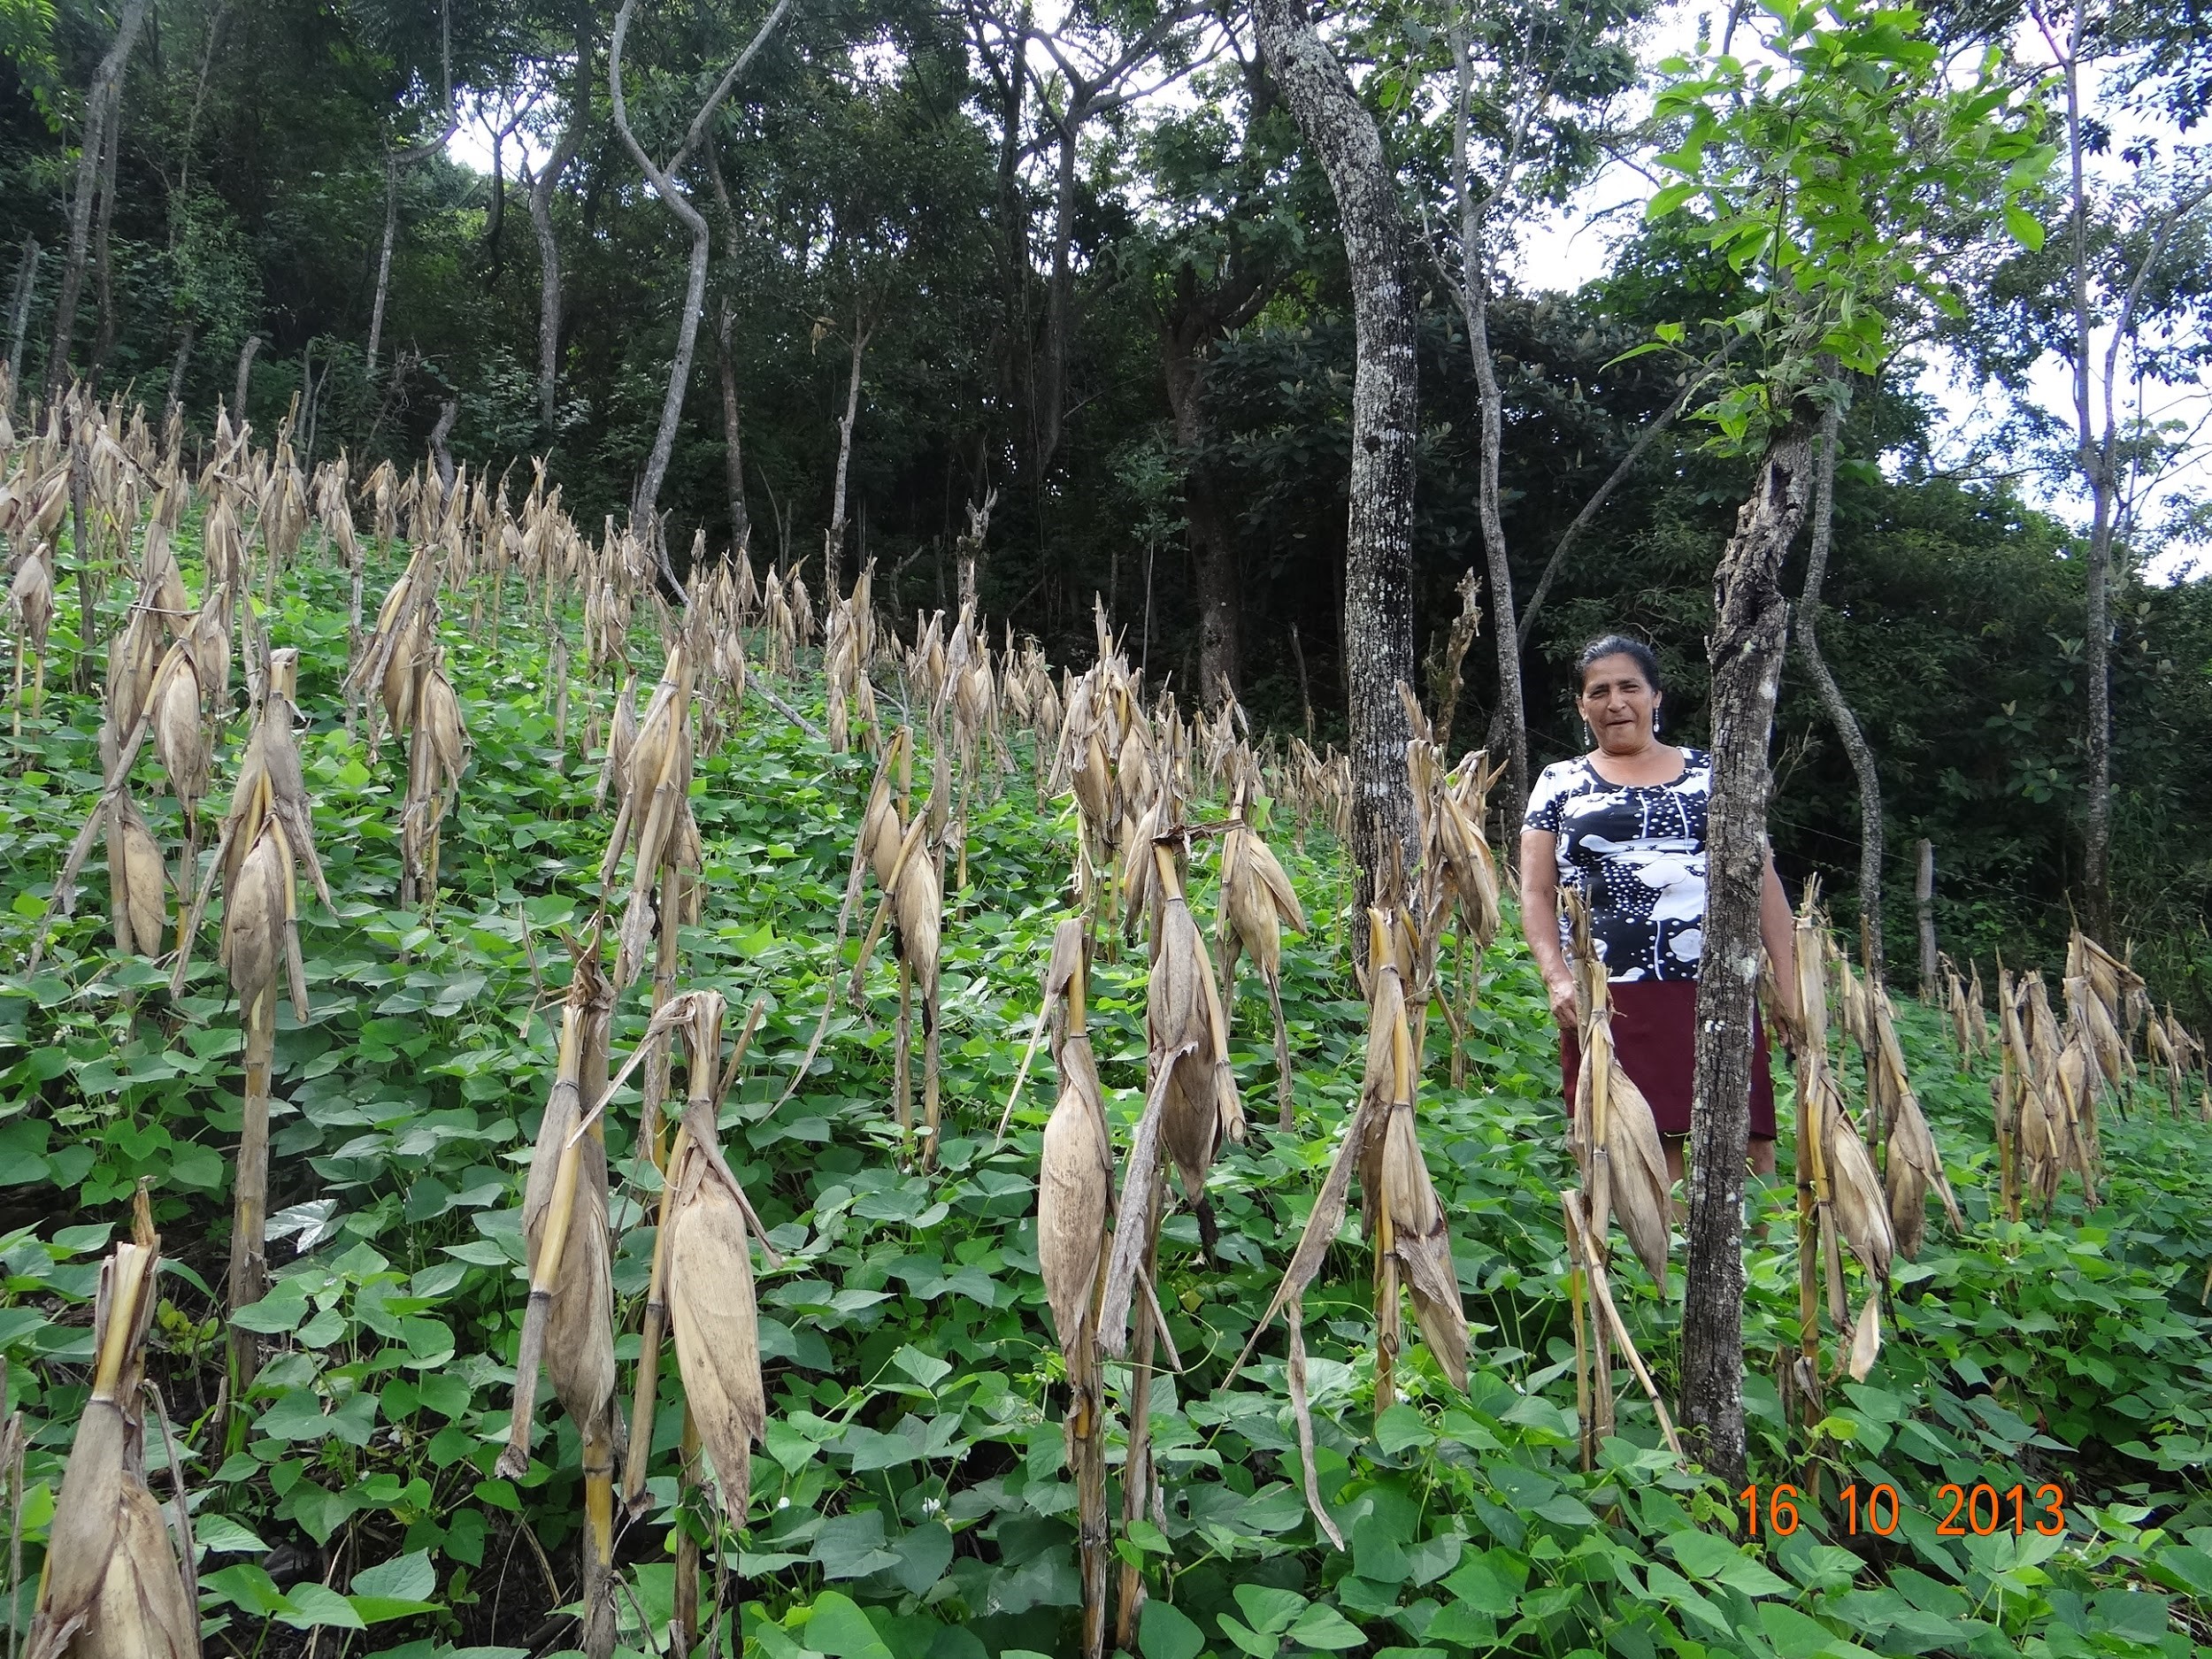 Dona Celia stands in her maize and bean field. The maize has been doubled-over to dry, and intercropped beans are beginning to flower. Trees have been left in the field to help stabilize soil and provide mulch to protect the soil from wind and rain while building soil quality. This approach represents a more sustainable use of land that the project has supported with funding and agricultural expertise from USAID. Photo credit: Edwin García, ABES Project